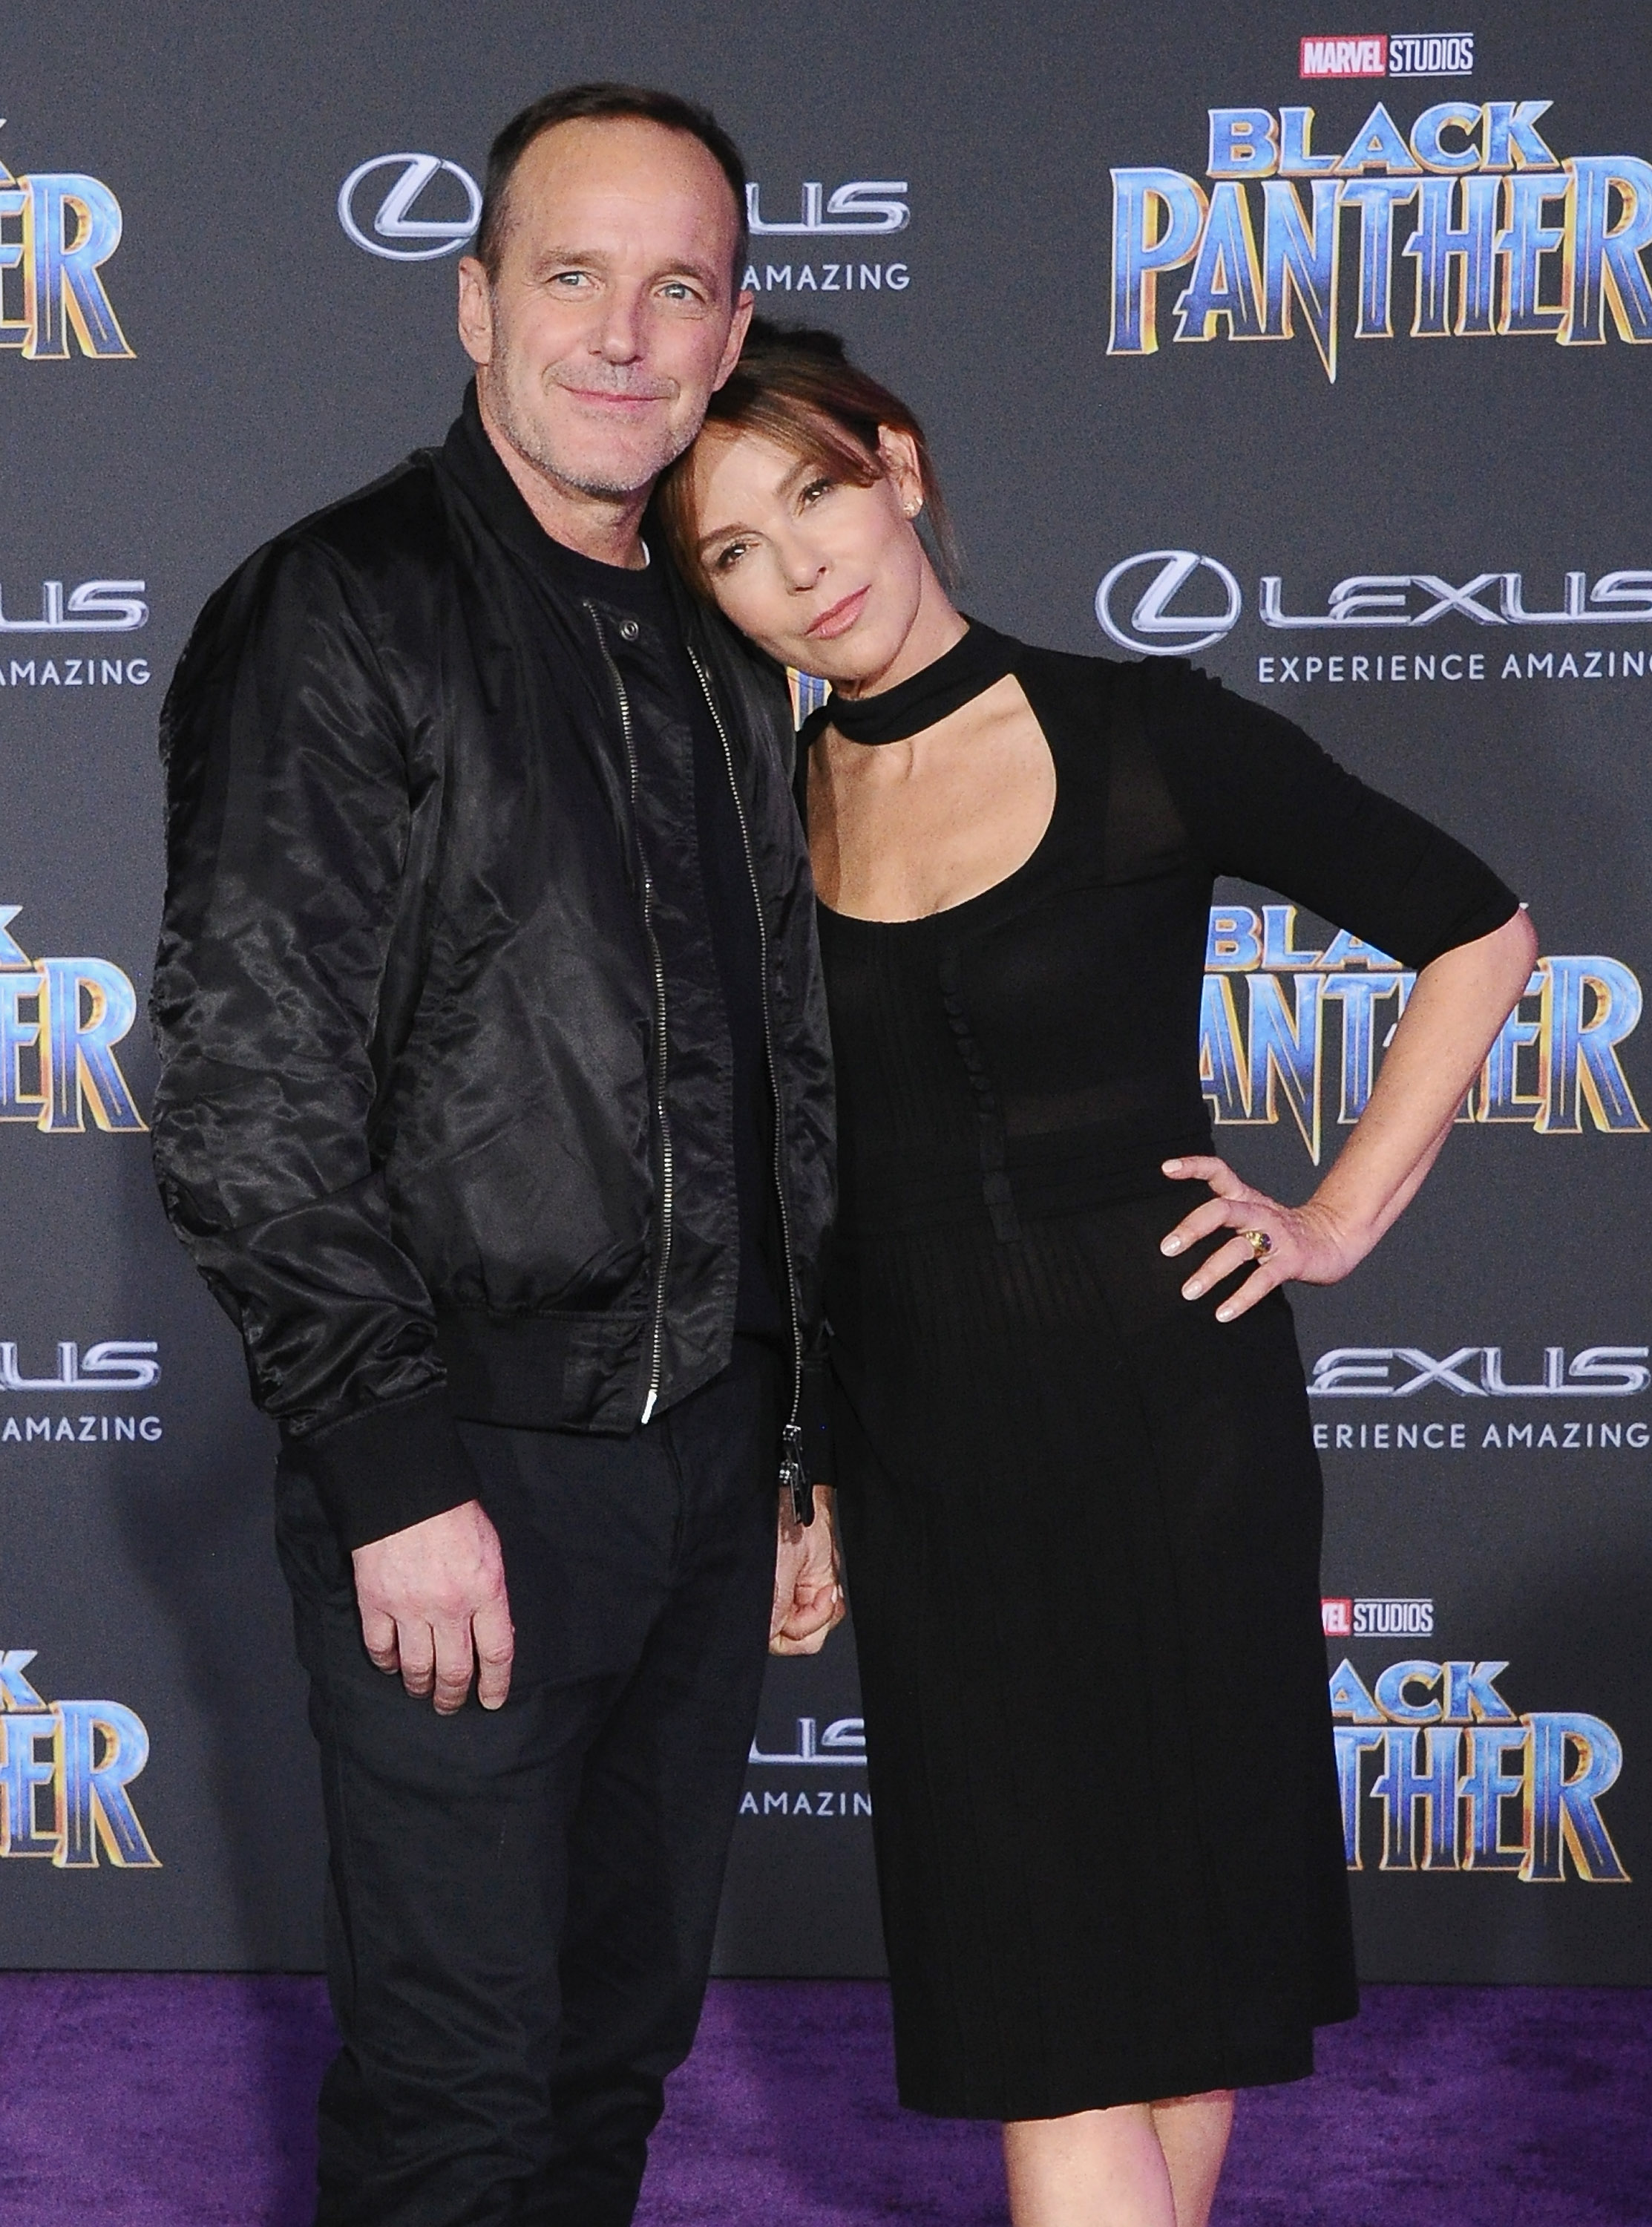 Clark Gregg and Jennifer Grey attend the premiere "Black Panther" at Dolby Theatre in Hollywood, California, on January 29, 2018. | Source: Getty Images